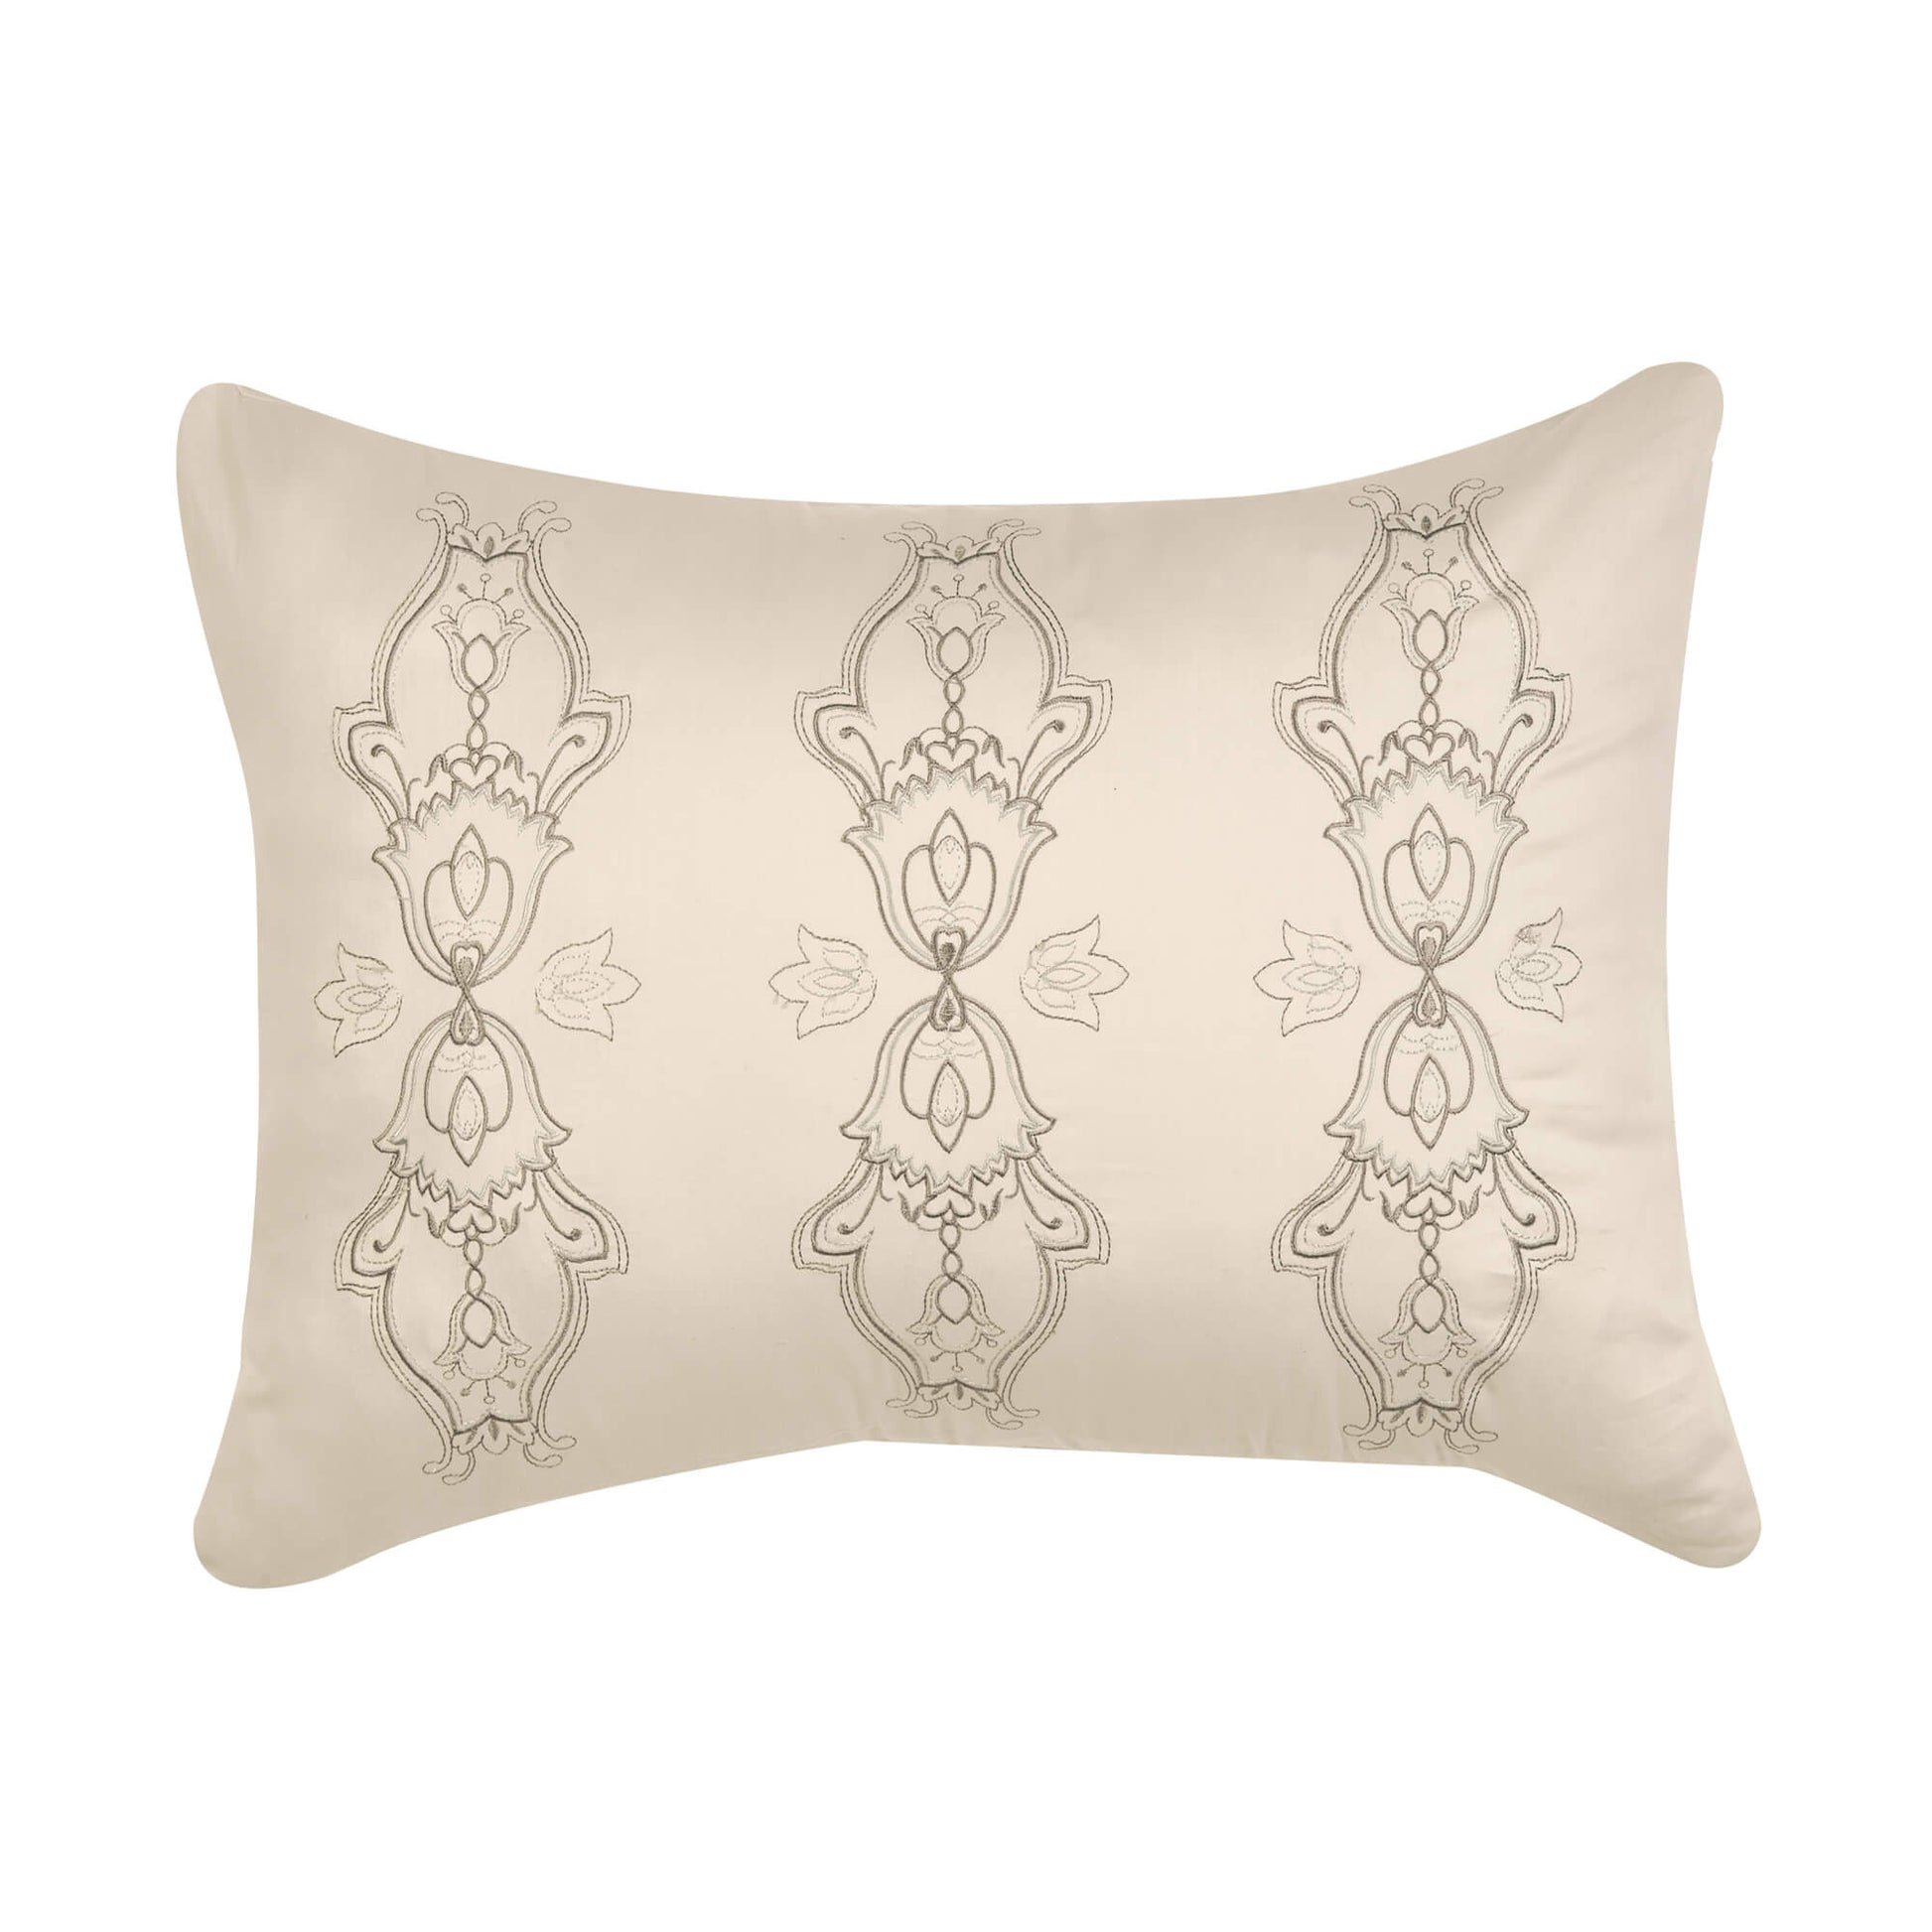 Valerie - 5 Piece - Embroidered freeshipping - North Home